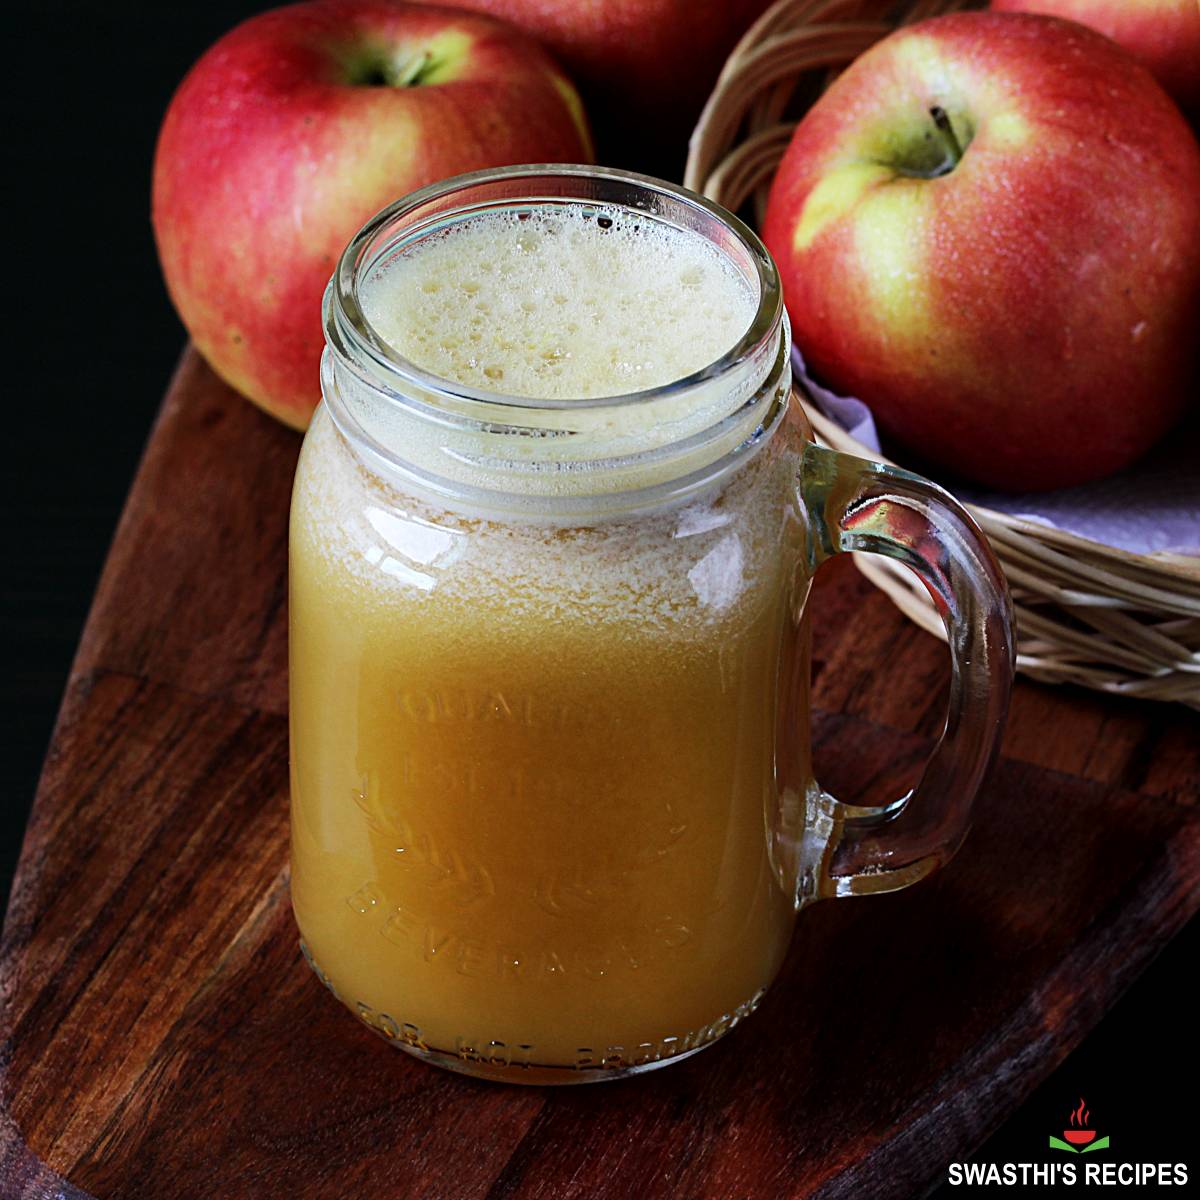 Apple juice recipe made with & without juicer